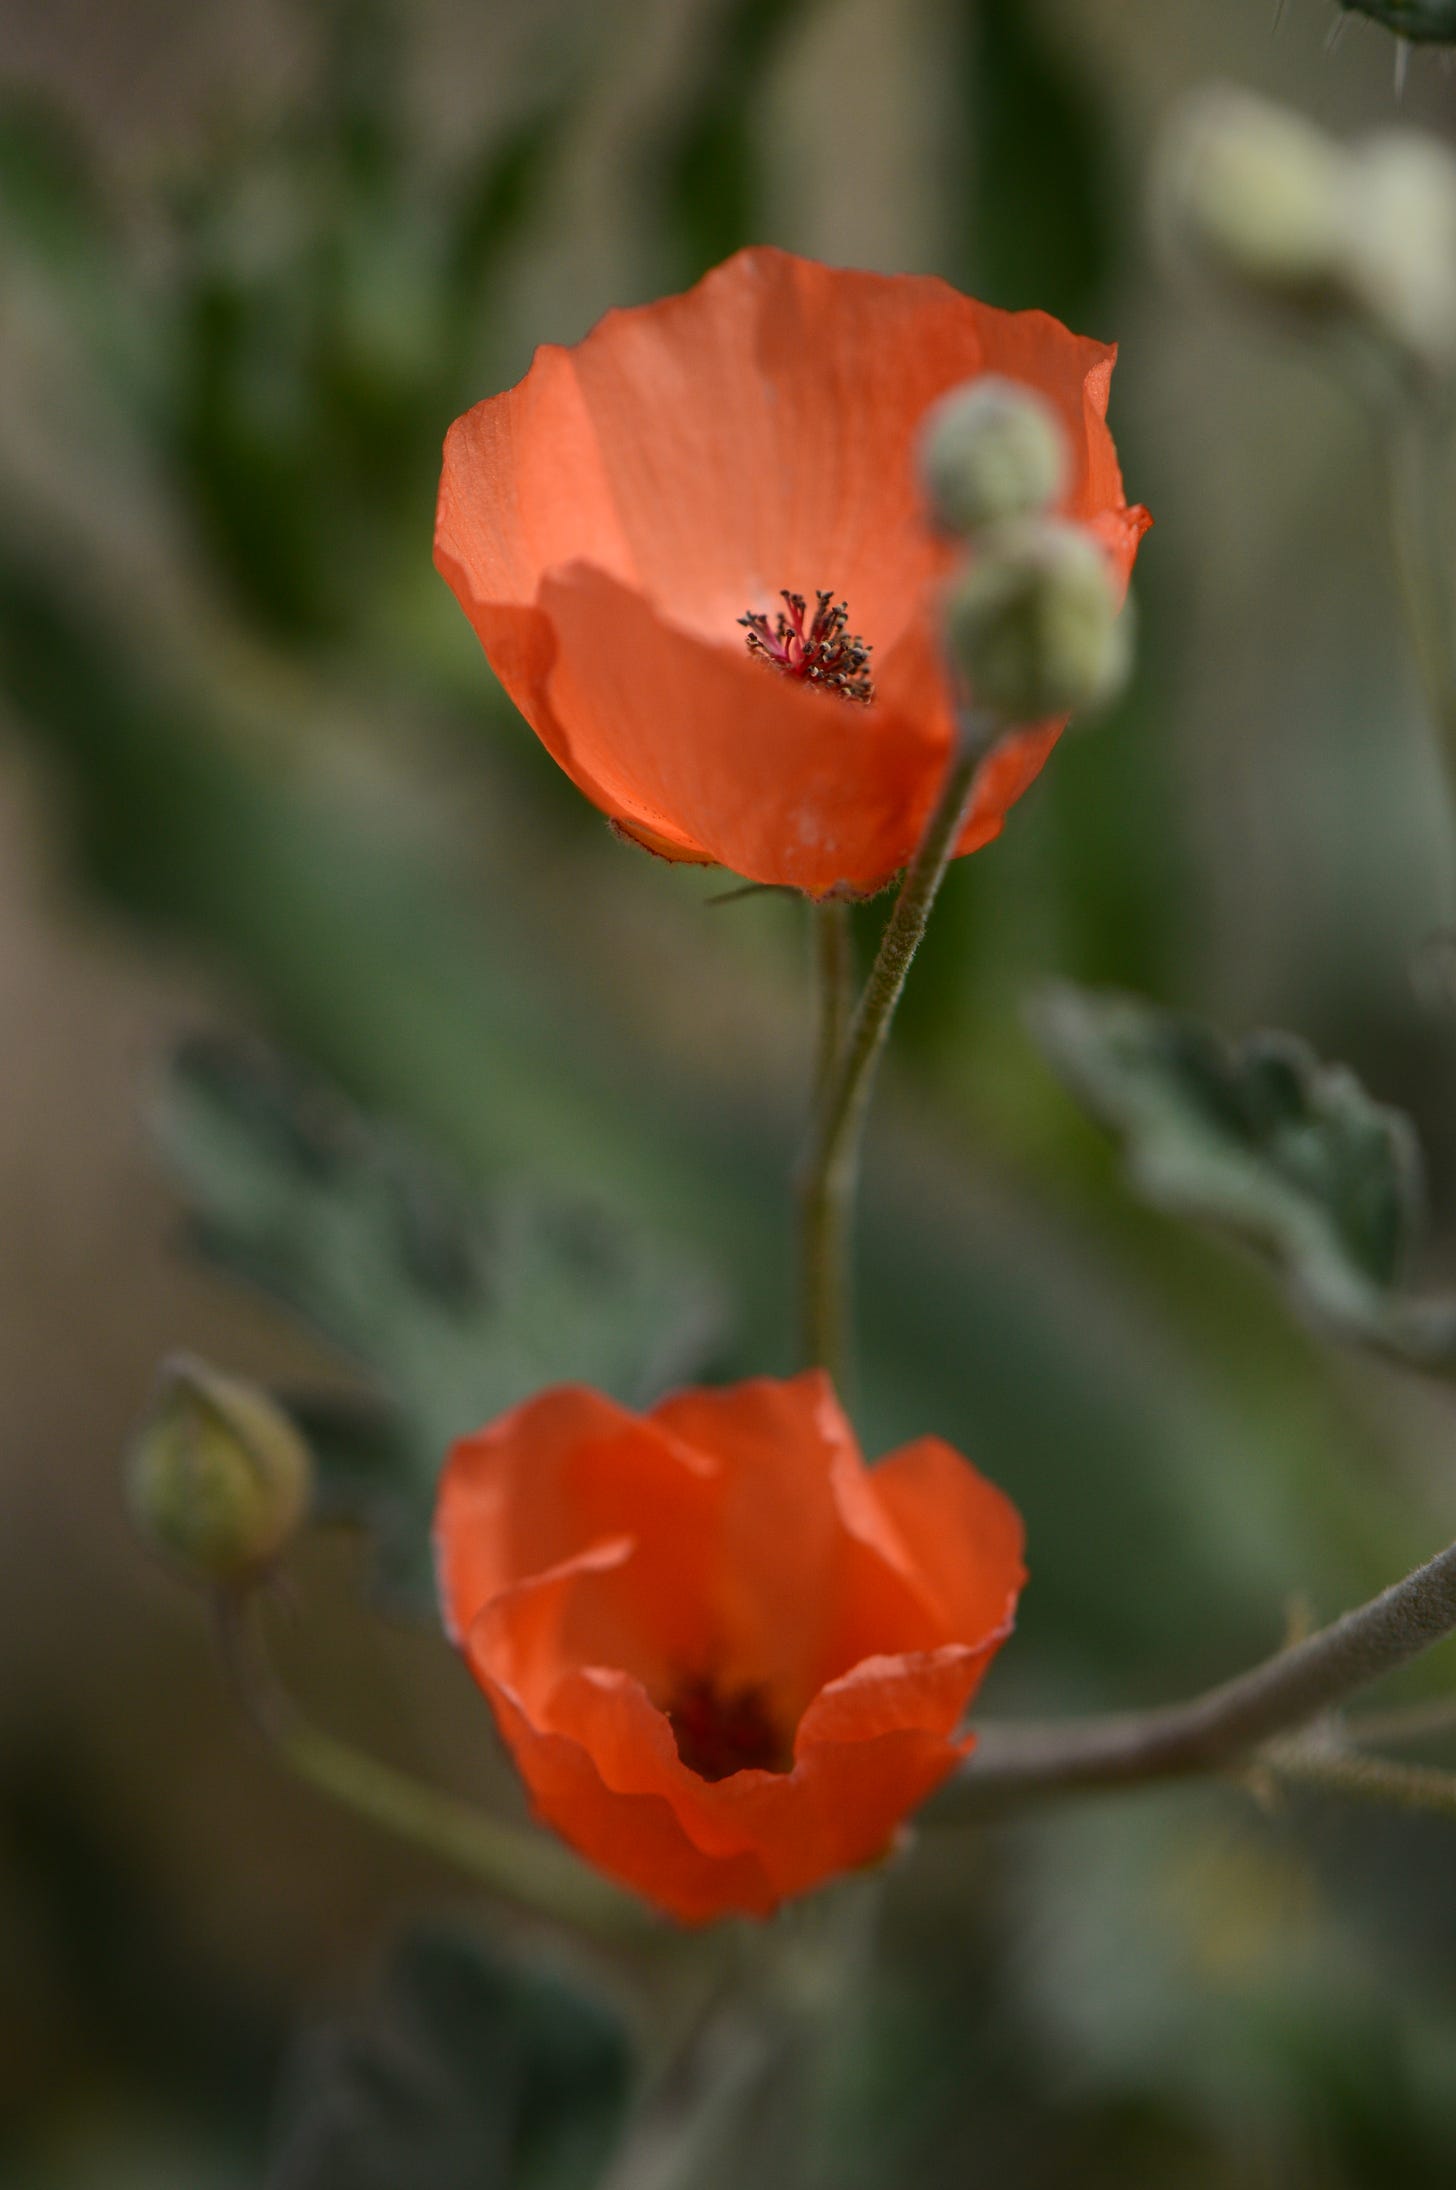 orange wildflowers are cup-shaped with maroon stamens deep inside